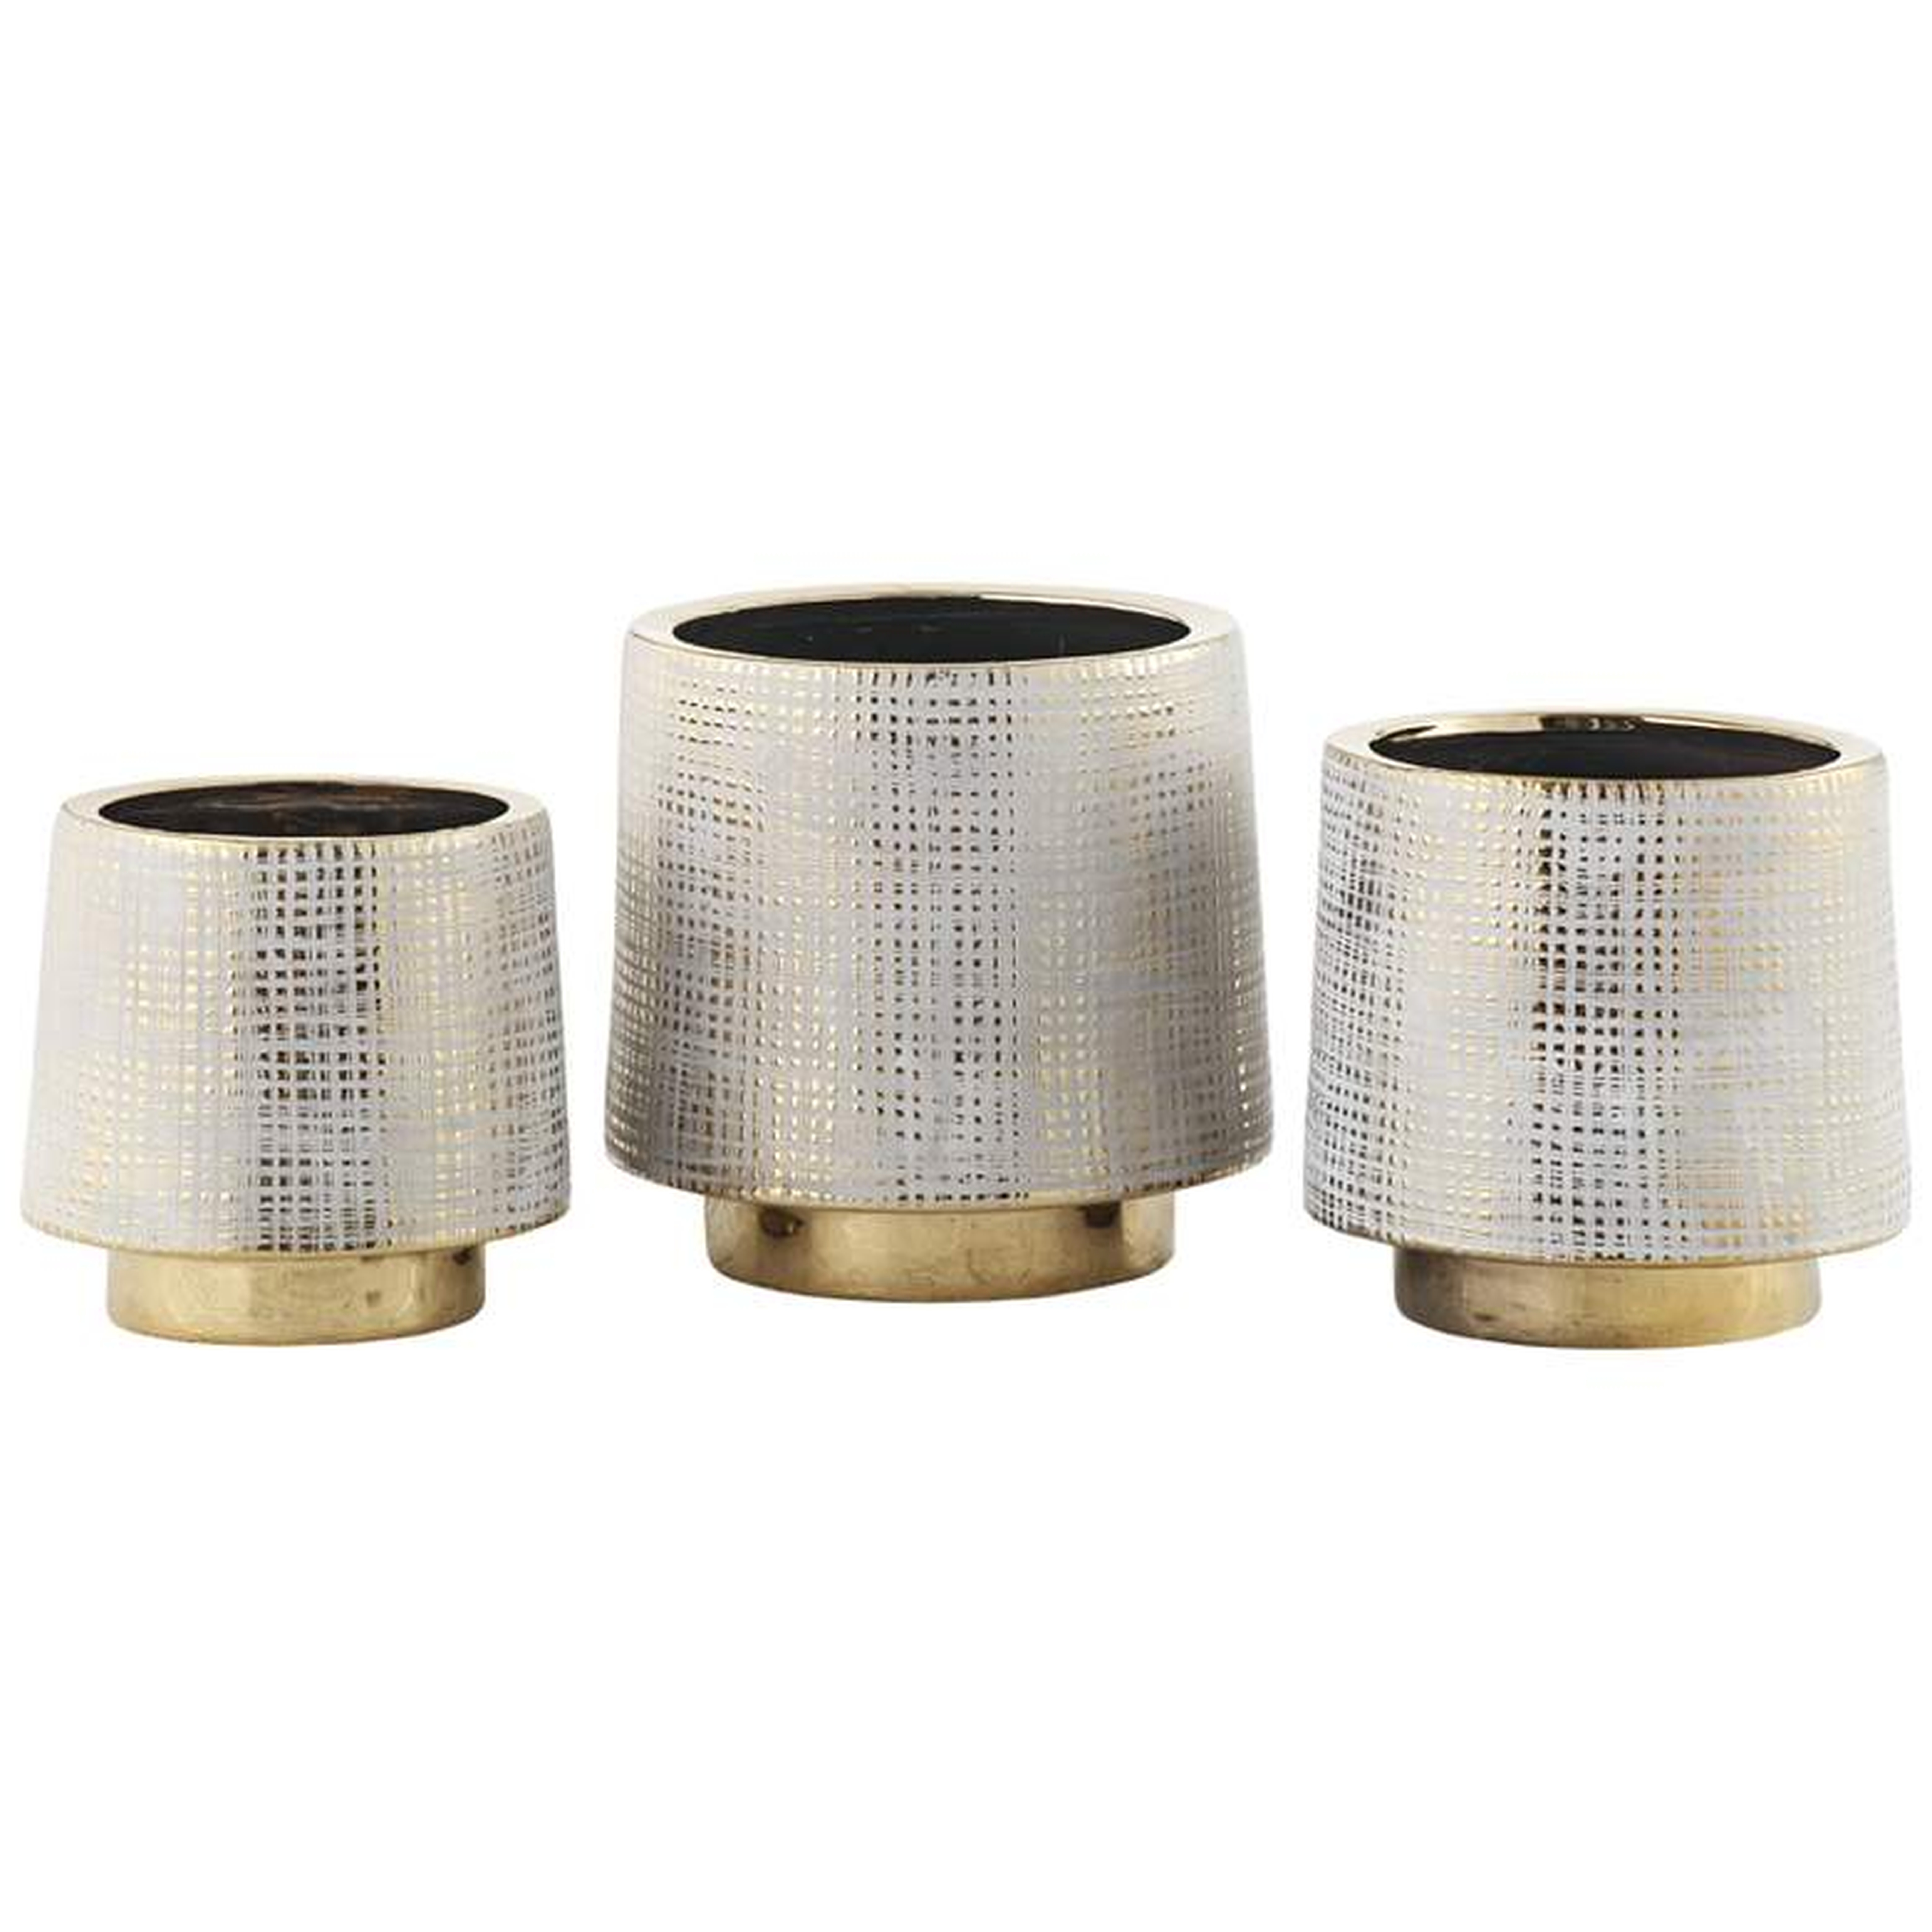 Beacon Gray and Gold Ceramic Vases Set of 3 - Lamps Plus